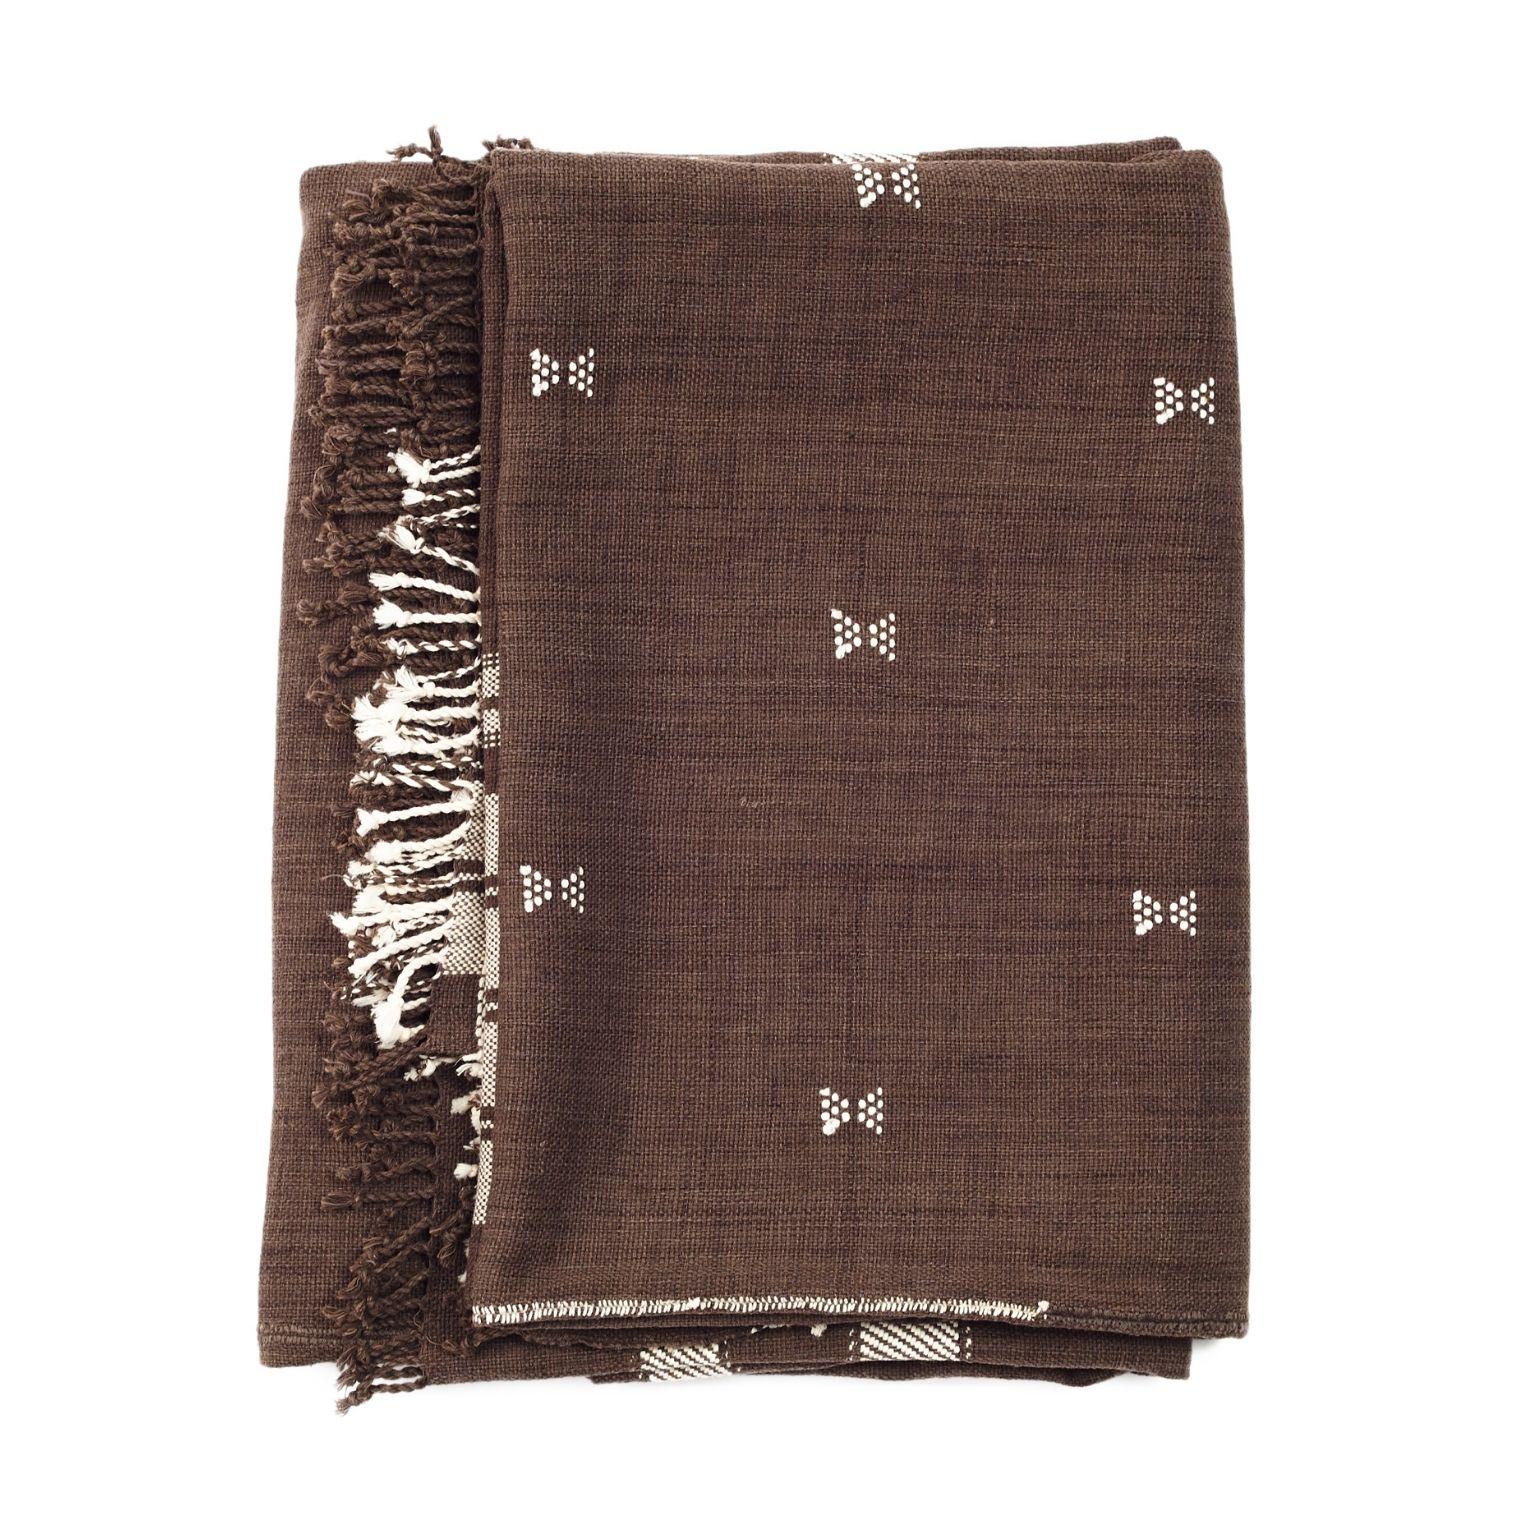 Ebony Handloom Organic Cotton Throw In Minimal Motifs & Shades Of  Earthy Brown  In New Condition For Sale In Bloomfield Hills, MI